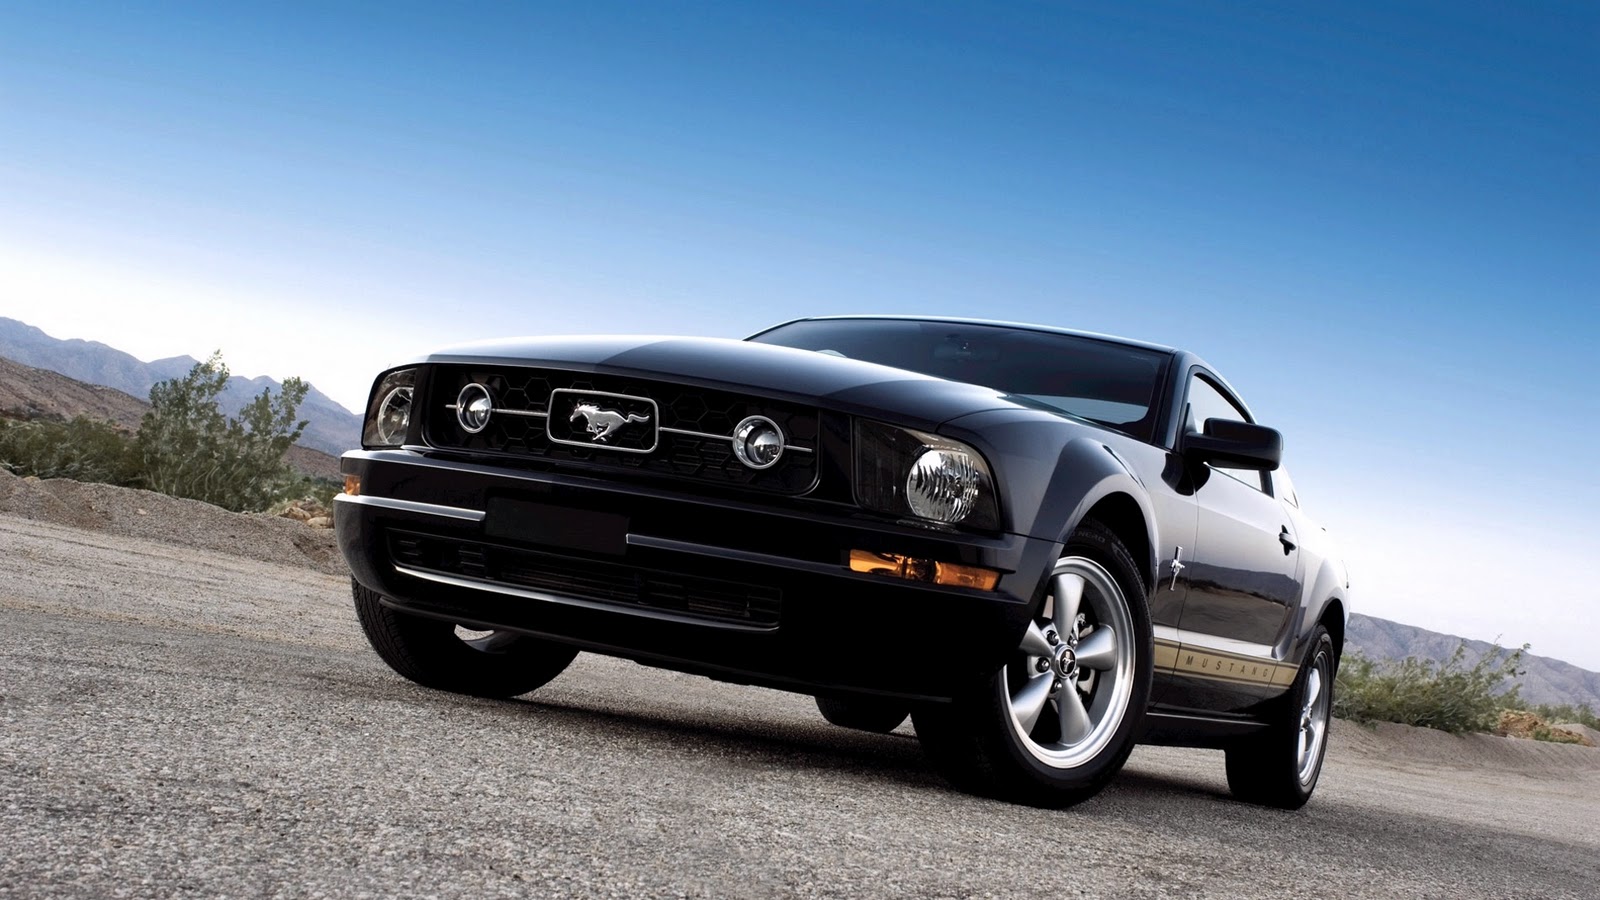 Ford Mustang Wallpaper HD Picture Photo Jpg